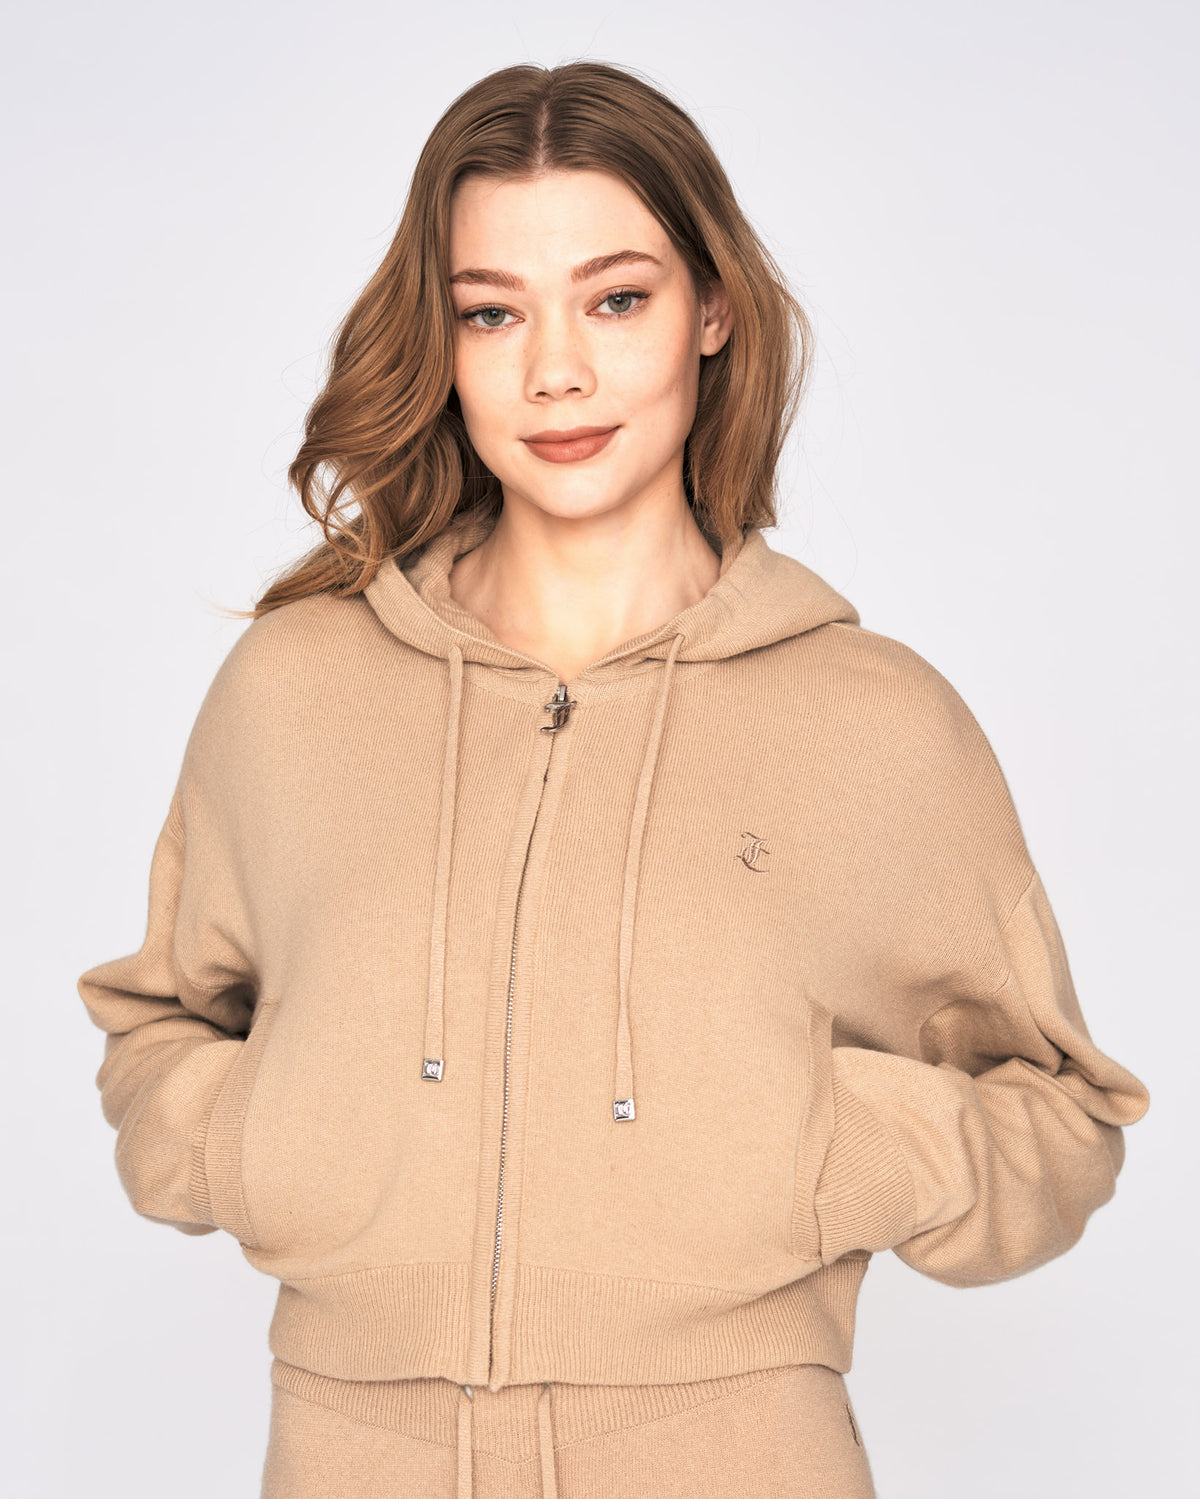 Juicy Couture Knitted Cashmere Blend Hoodies and Sweaters